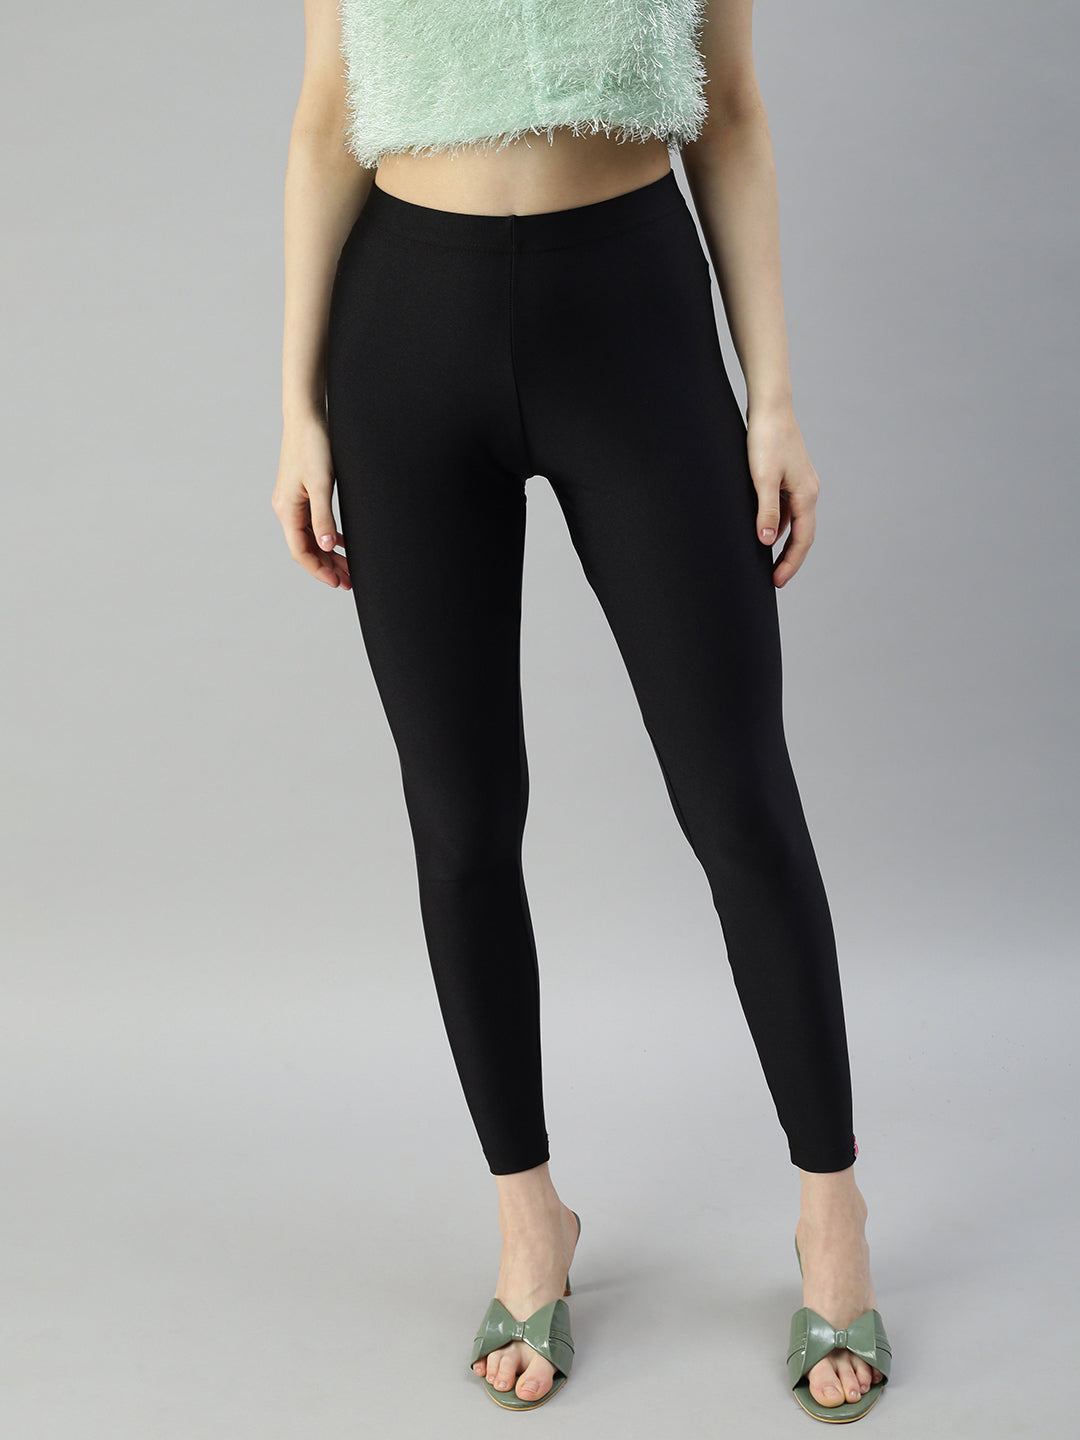 Buy Women's Classic Fit Satin Leggings (CO2-GRY+BPNK -36_Multicolor_36) at  Amazon.in